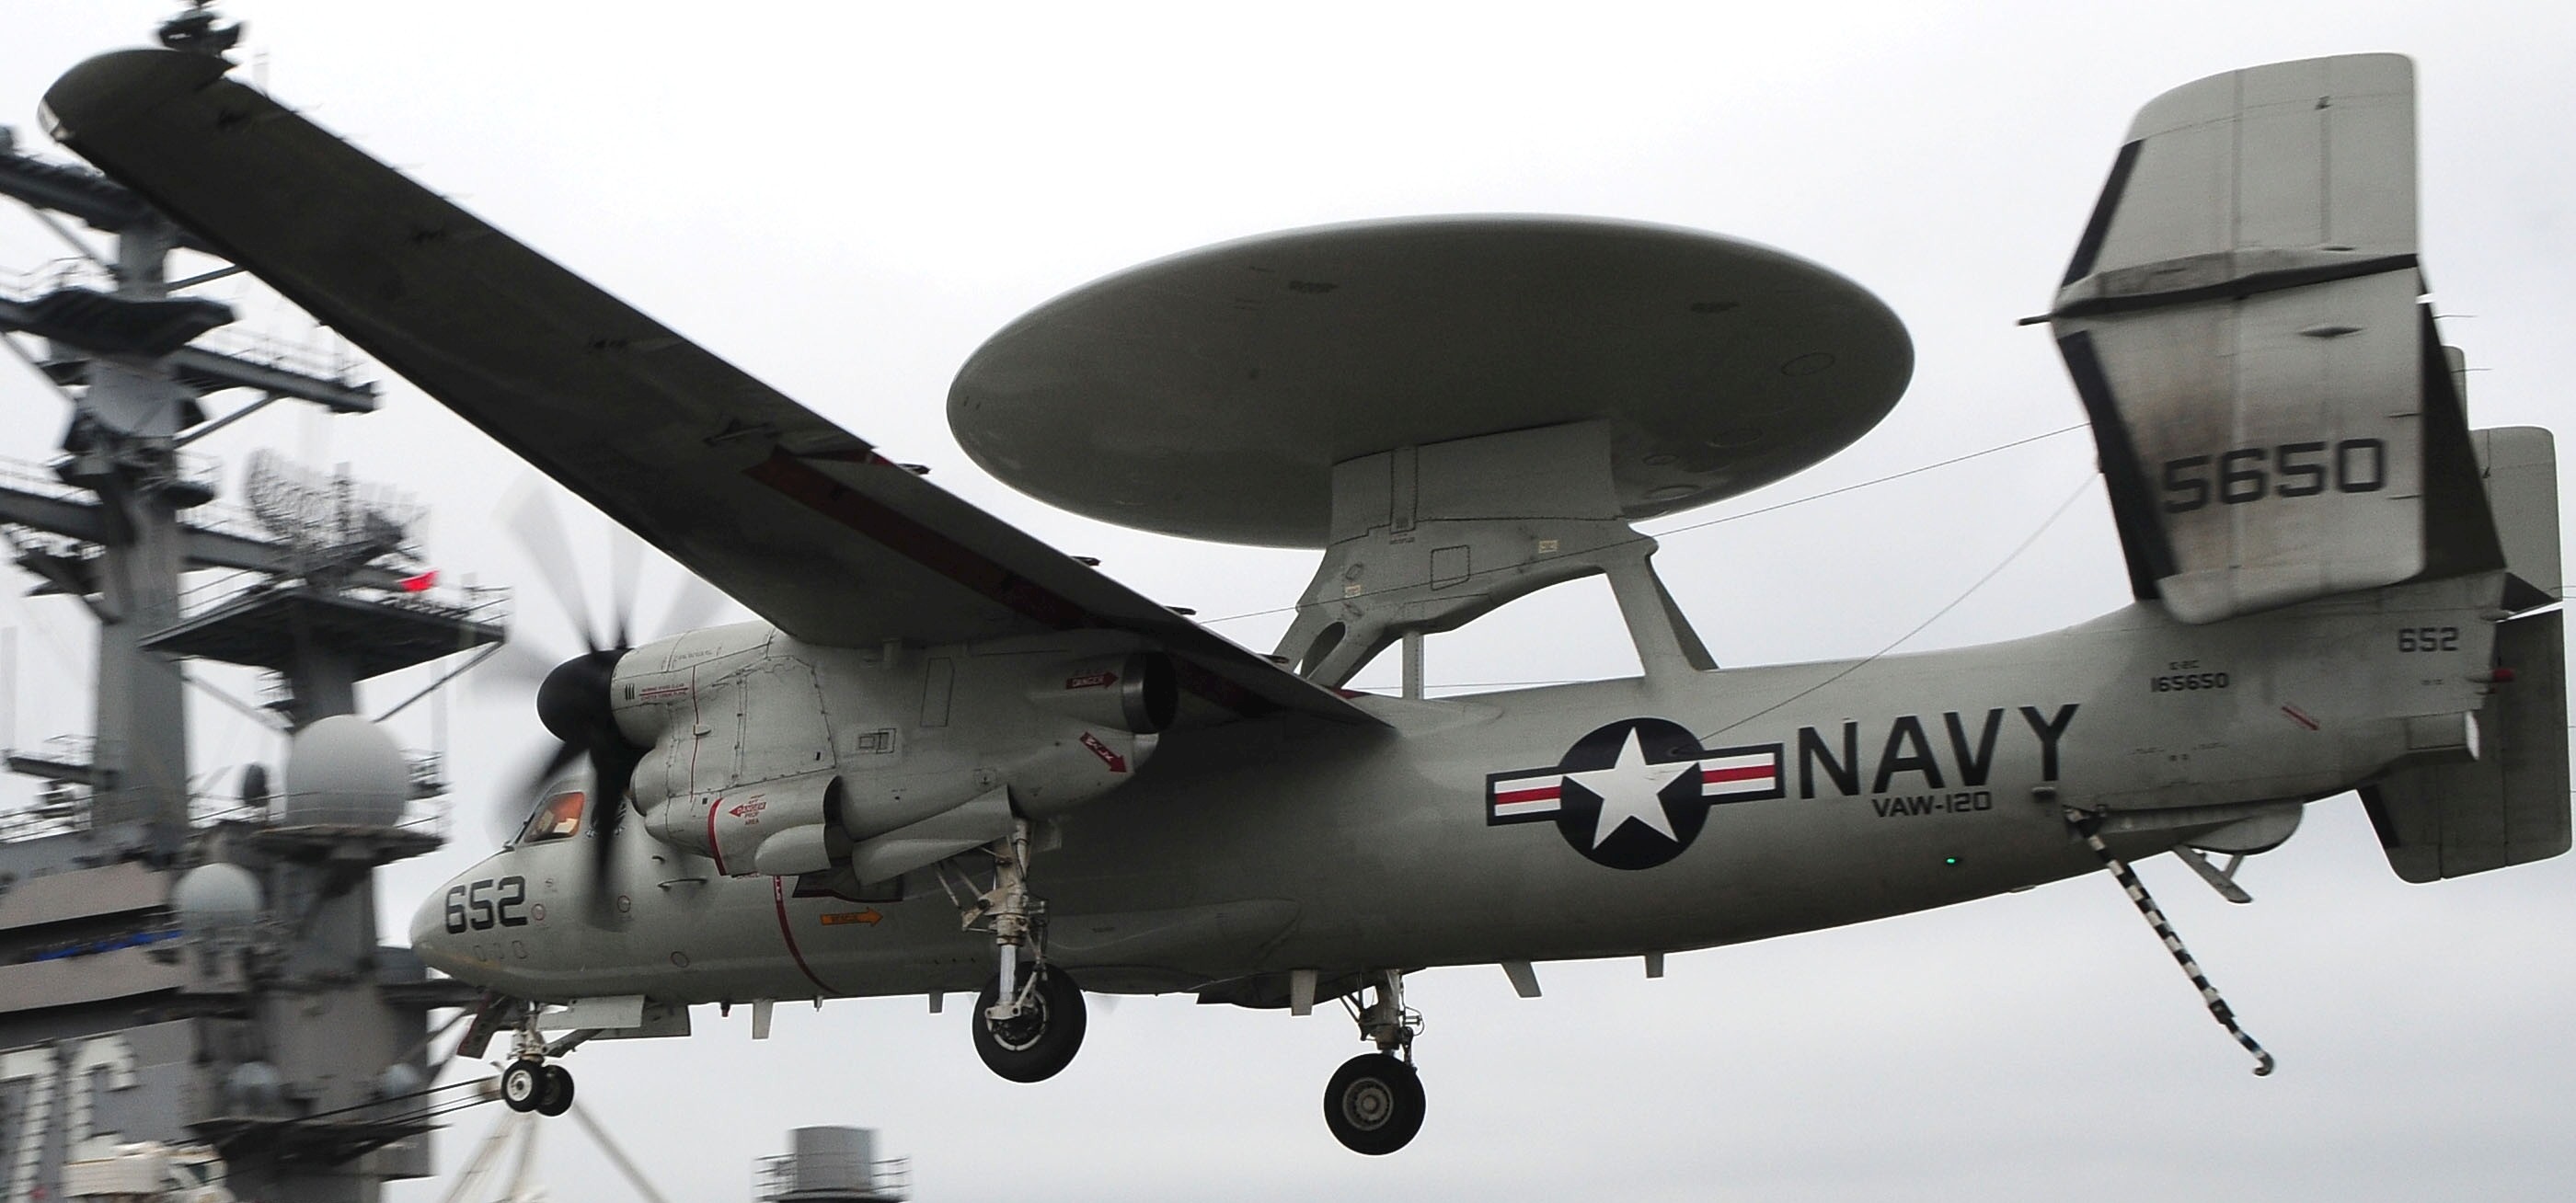 vaw-120 greyhawks carrier airborne early warning squadron e-2c hawkeye replacement uss ronald reagan cvn-76 92